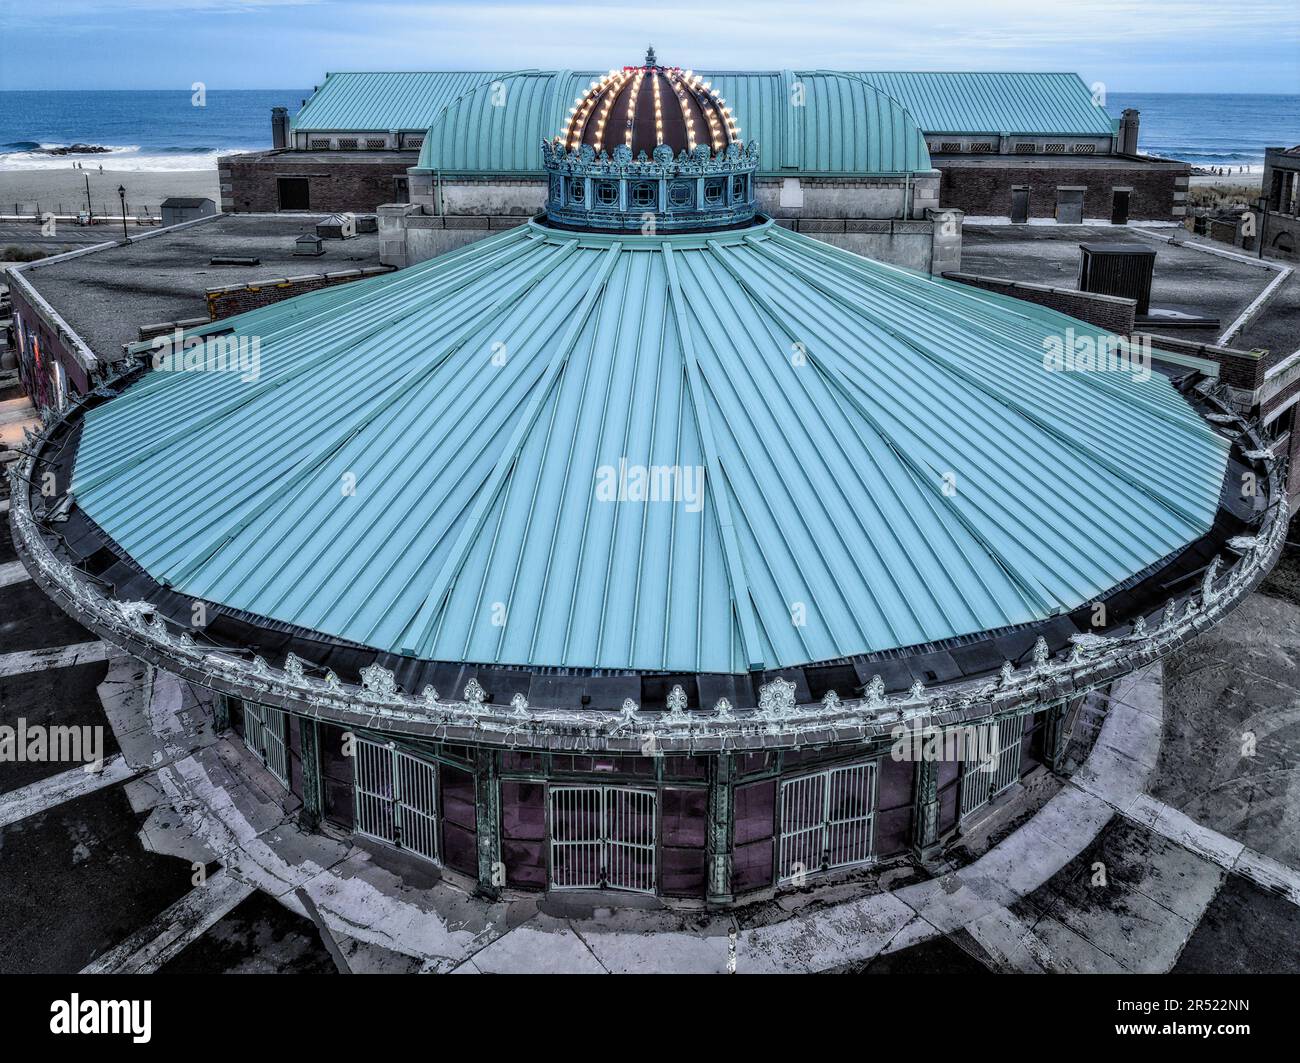 Asbury Park Carousel House - Aerial view to the historic Asbury Park's Carousel House with Asbury Park Beach and boardwalk in the background.  This im Stock Photo